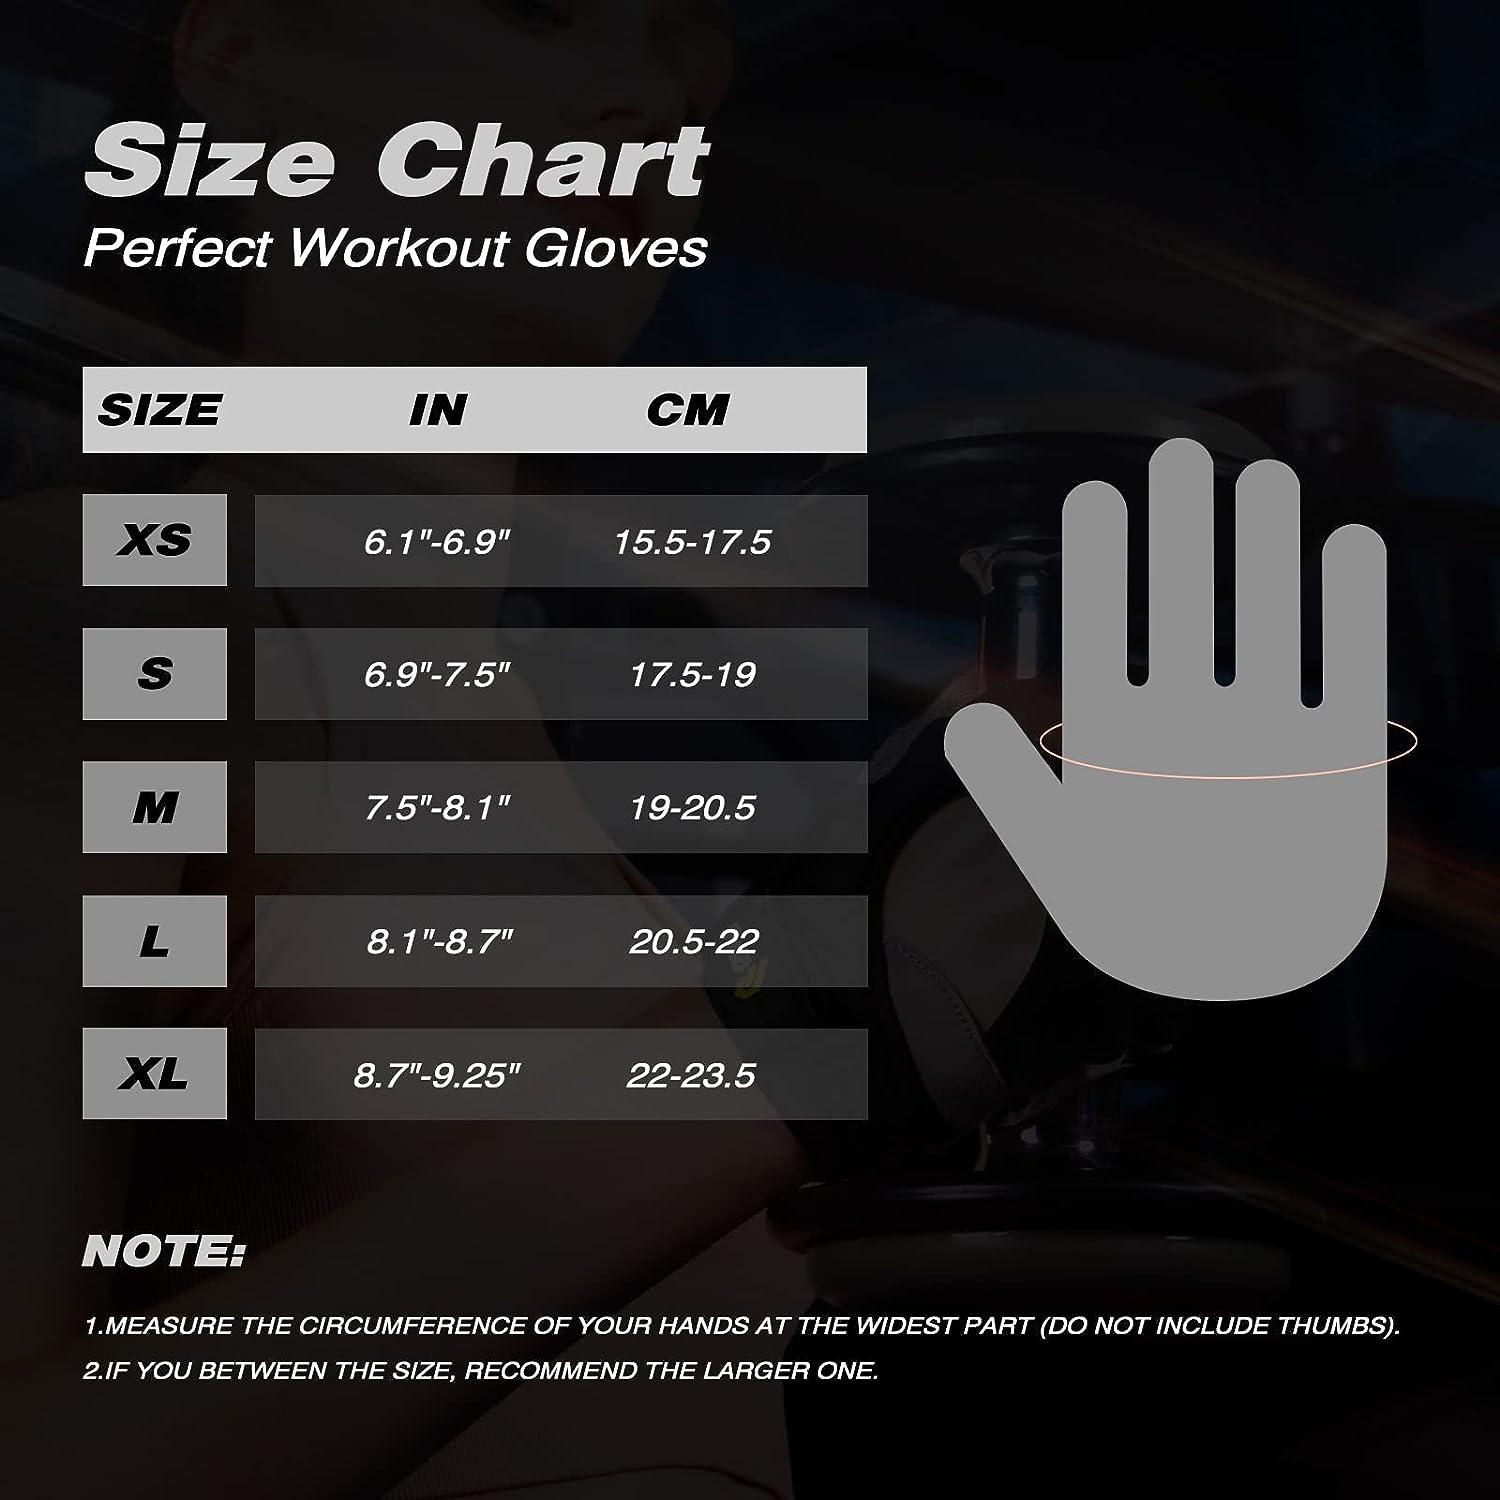 Fingerless Weight Lifting Workout Gloves For Men, Women With Palm